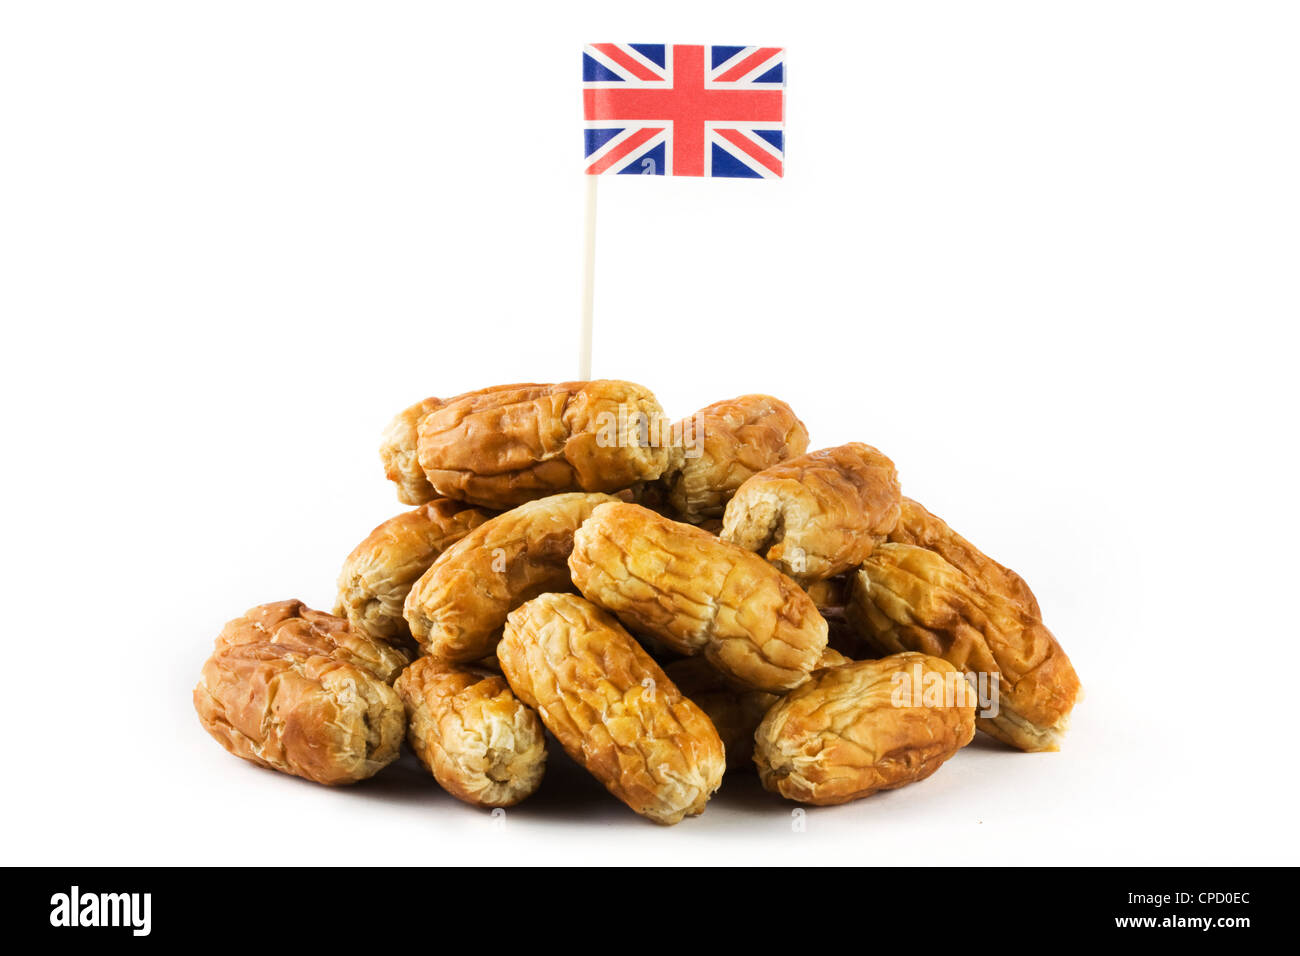 Pile of sausages with union jack on white Stock Photo